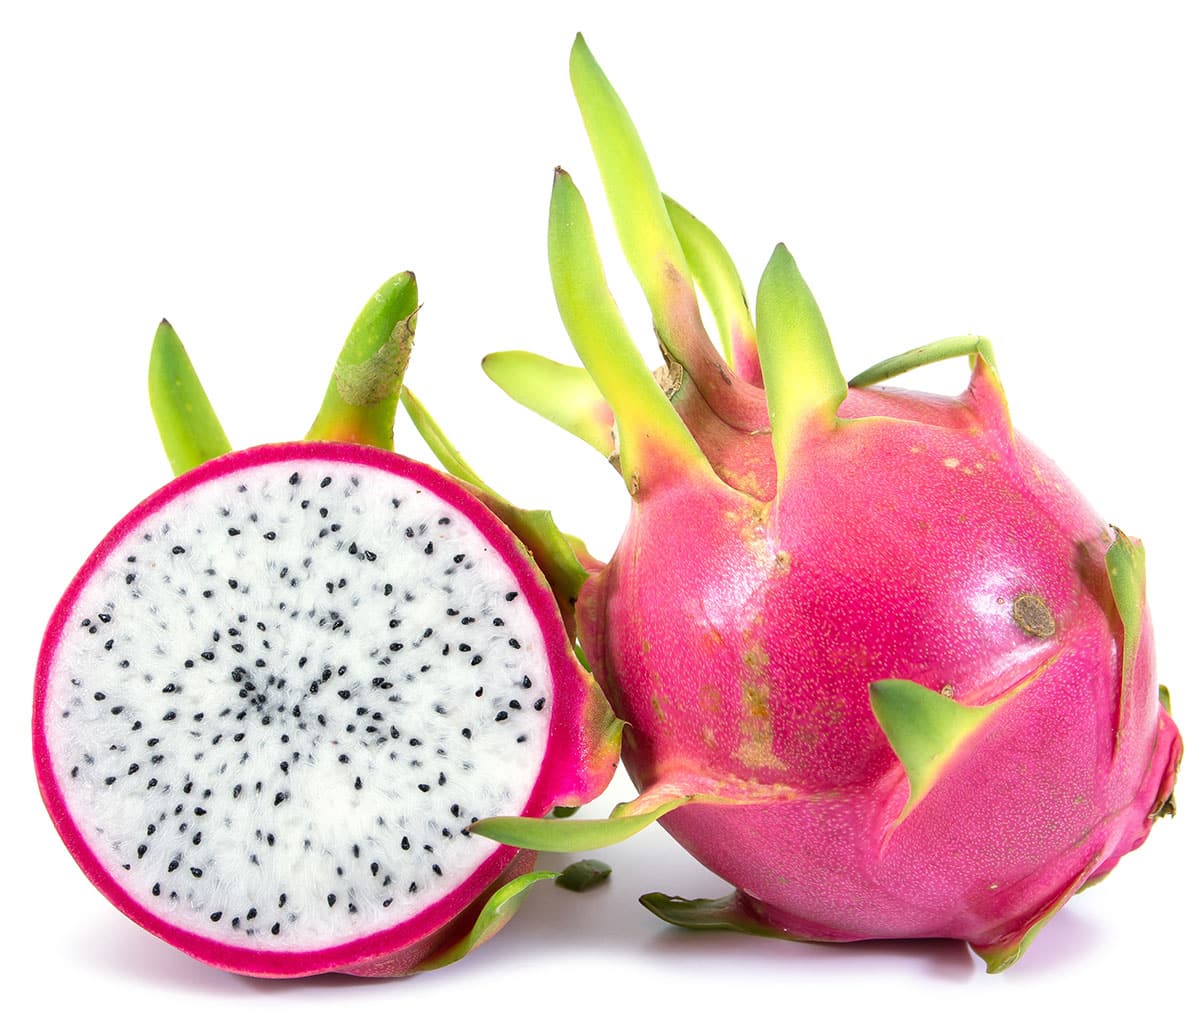 White dragon fruit on an isolated white background.